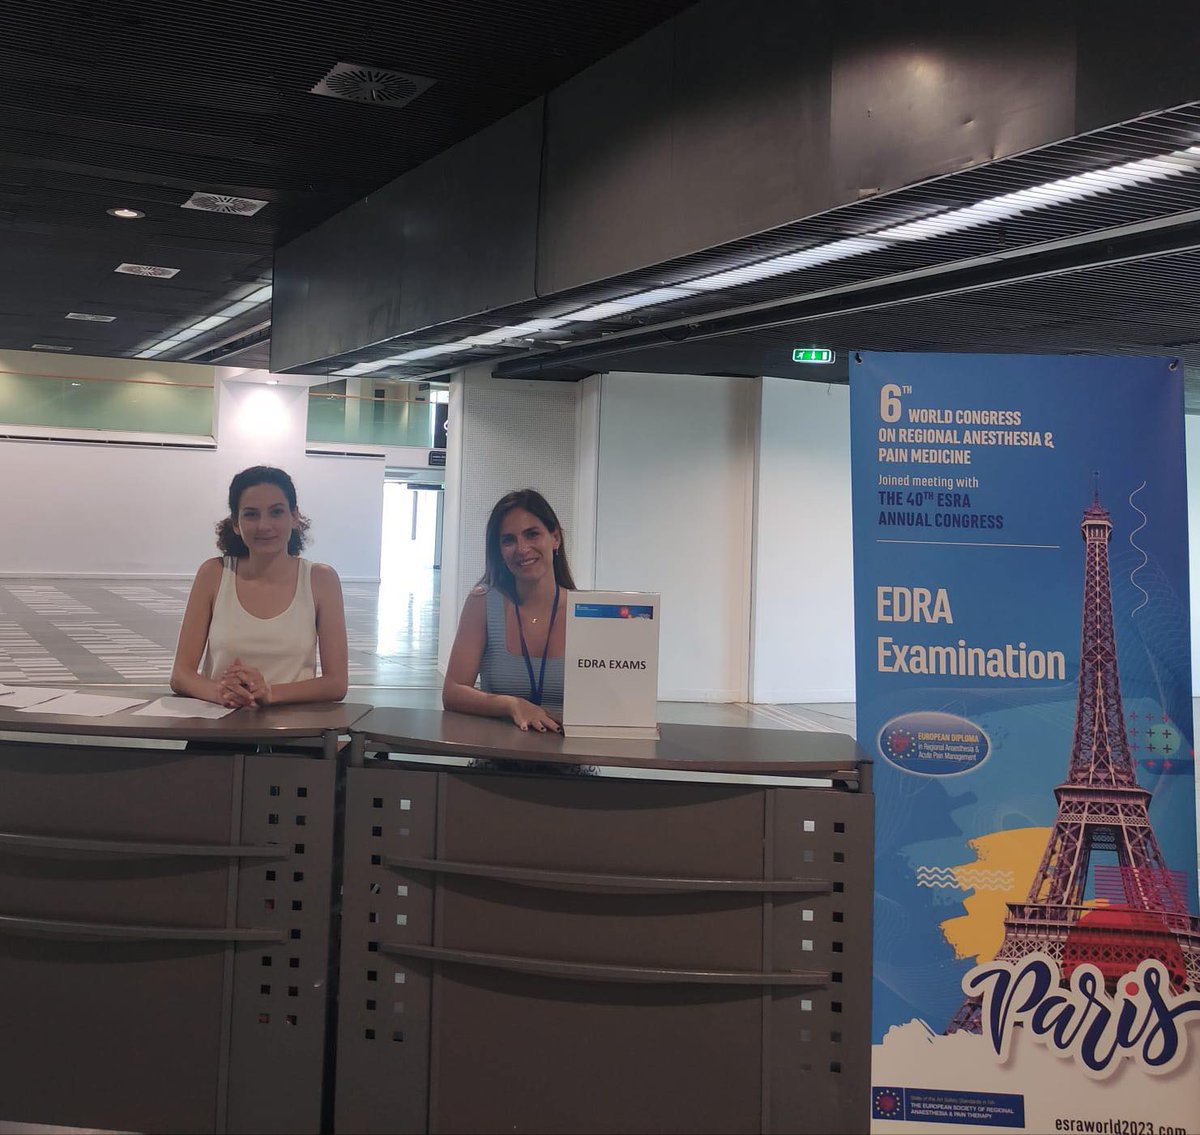 The #EDRA Part 2 exams have started in Paris just before the kick off of #ESRAworld2023 👨‍🎓🇫🇷 Good luck to the 57 candidates taking the Part II A&B oral tests today! 🍀